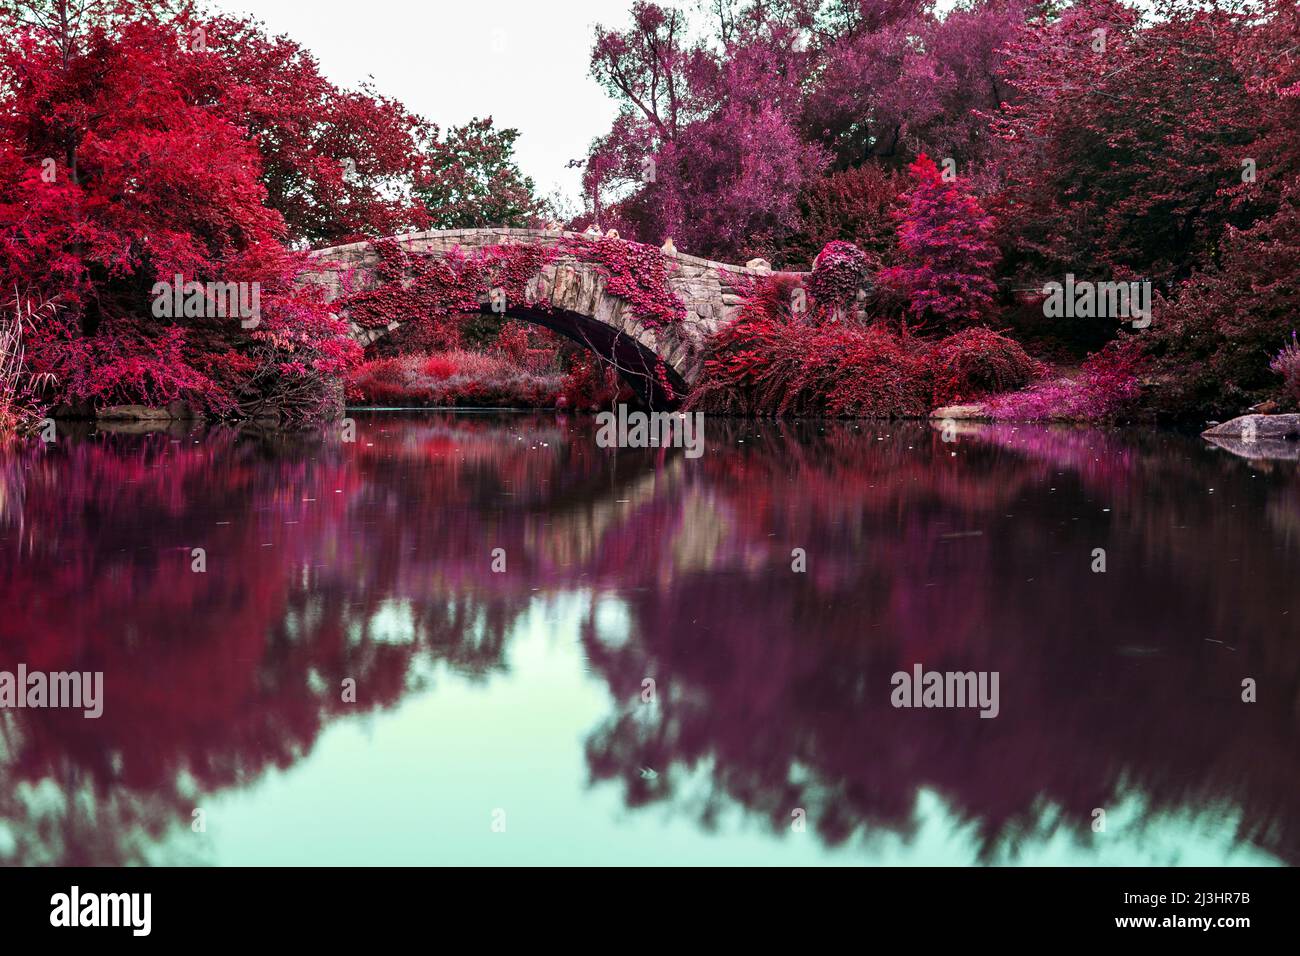 Gapstow Bridge, New York City, NY, USA, The Stone Bridge Gapstow Bridge is one of the icons of Central Park. The picture is color modified Stock Photo